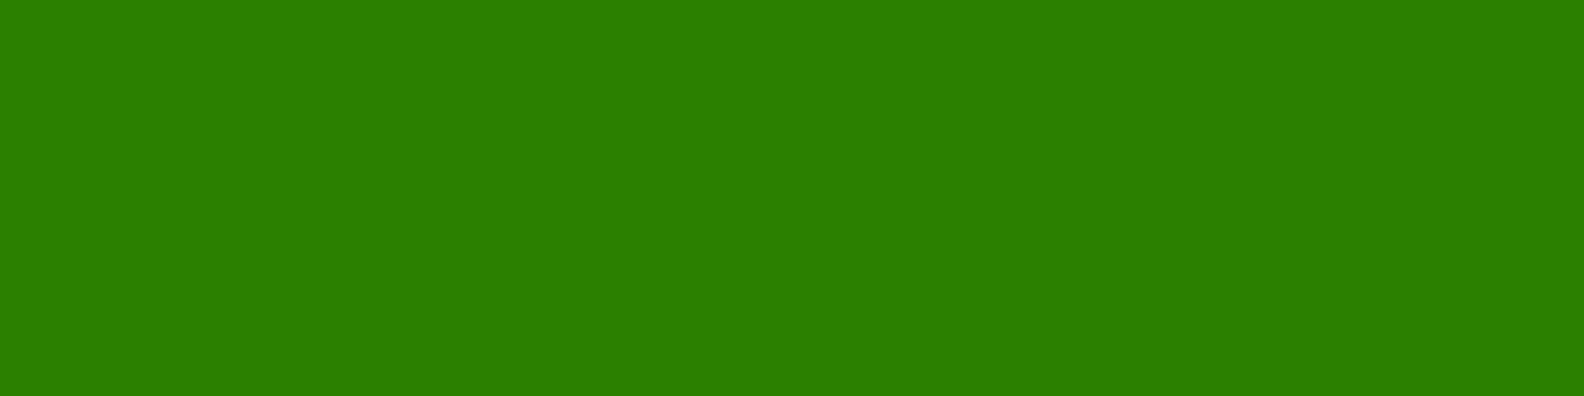 1584x396 Napier Green Solid Color Background